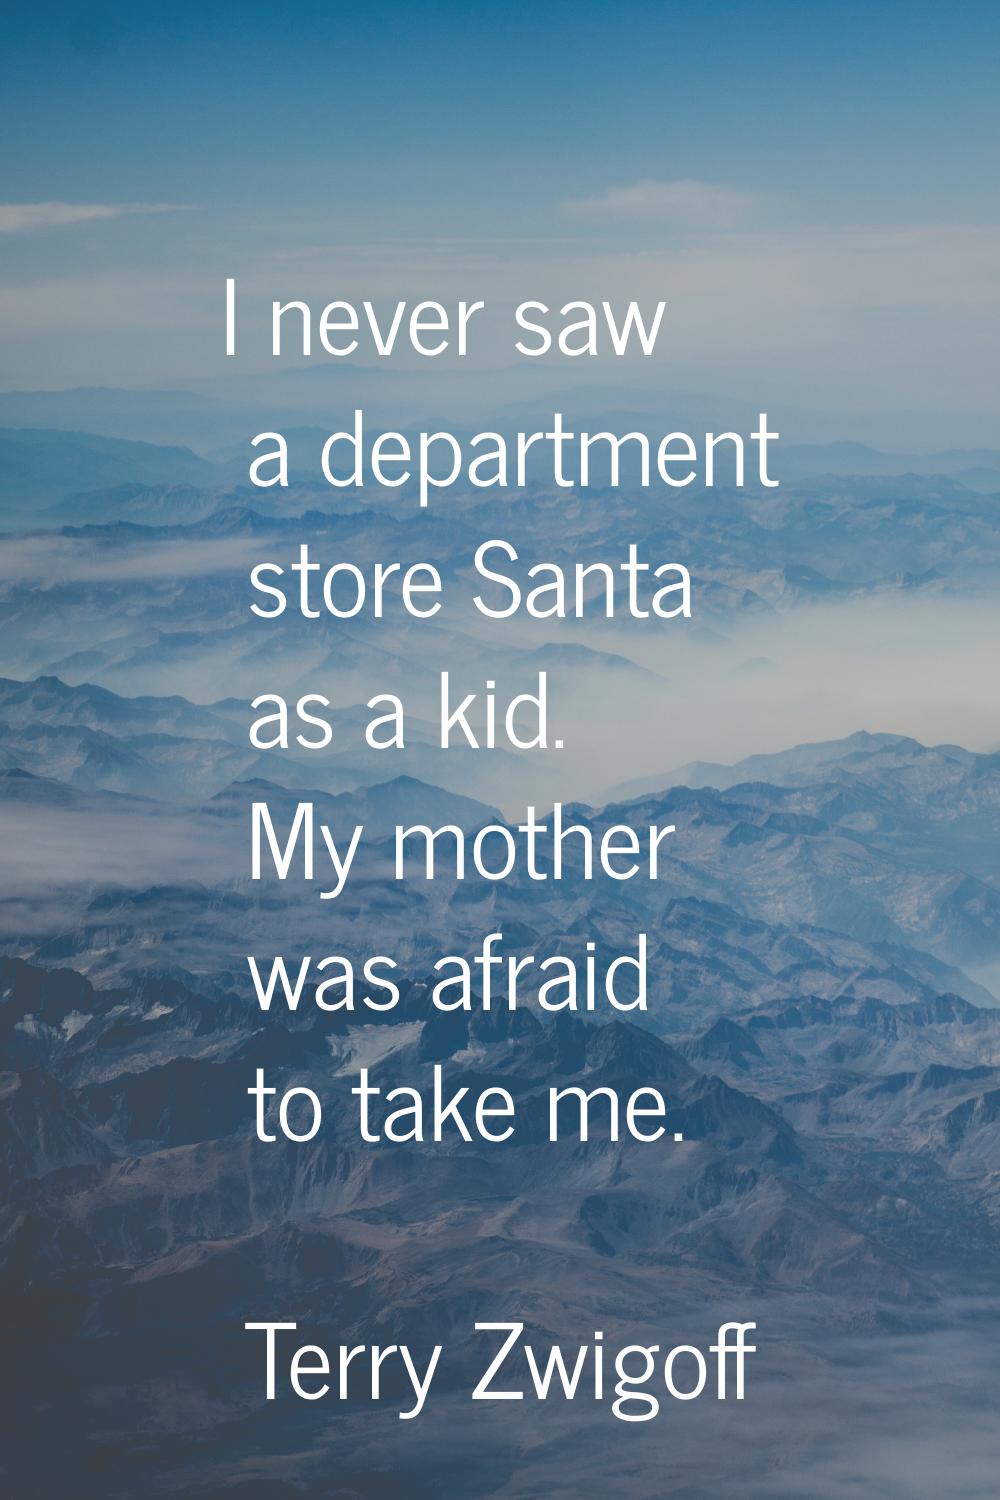 I never saw a department store Santa as a kid. My mother was afraid to take me.